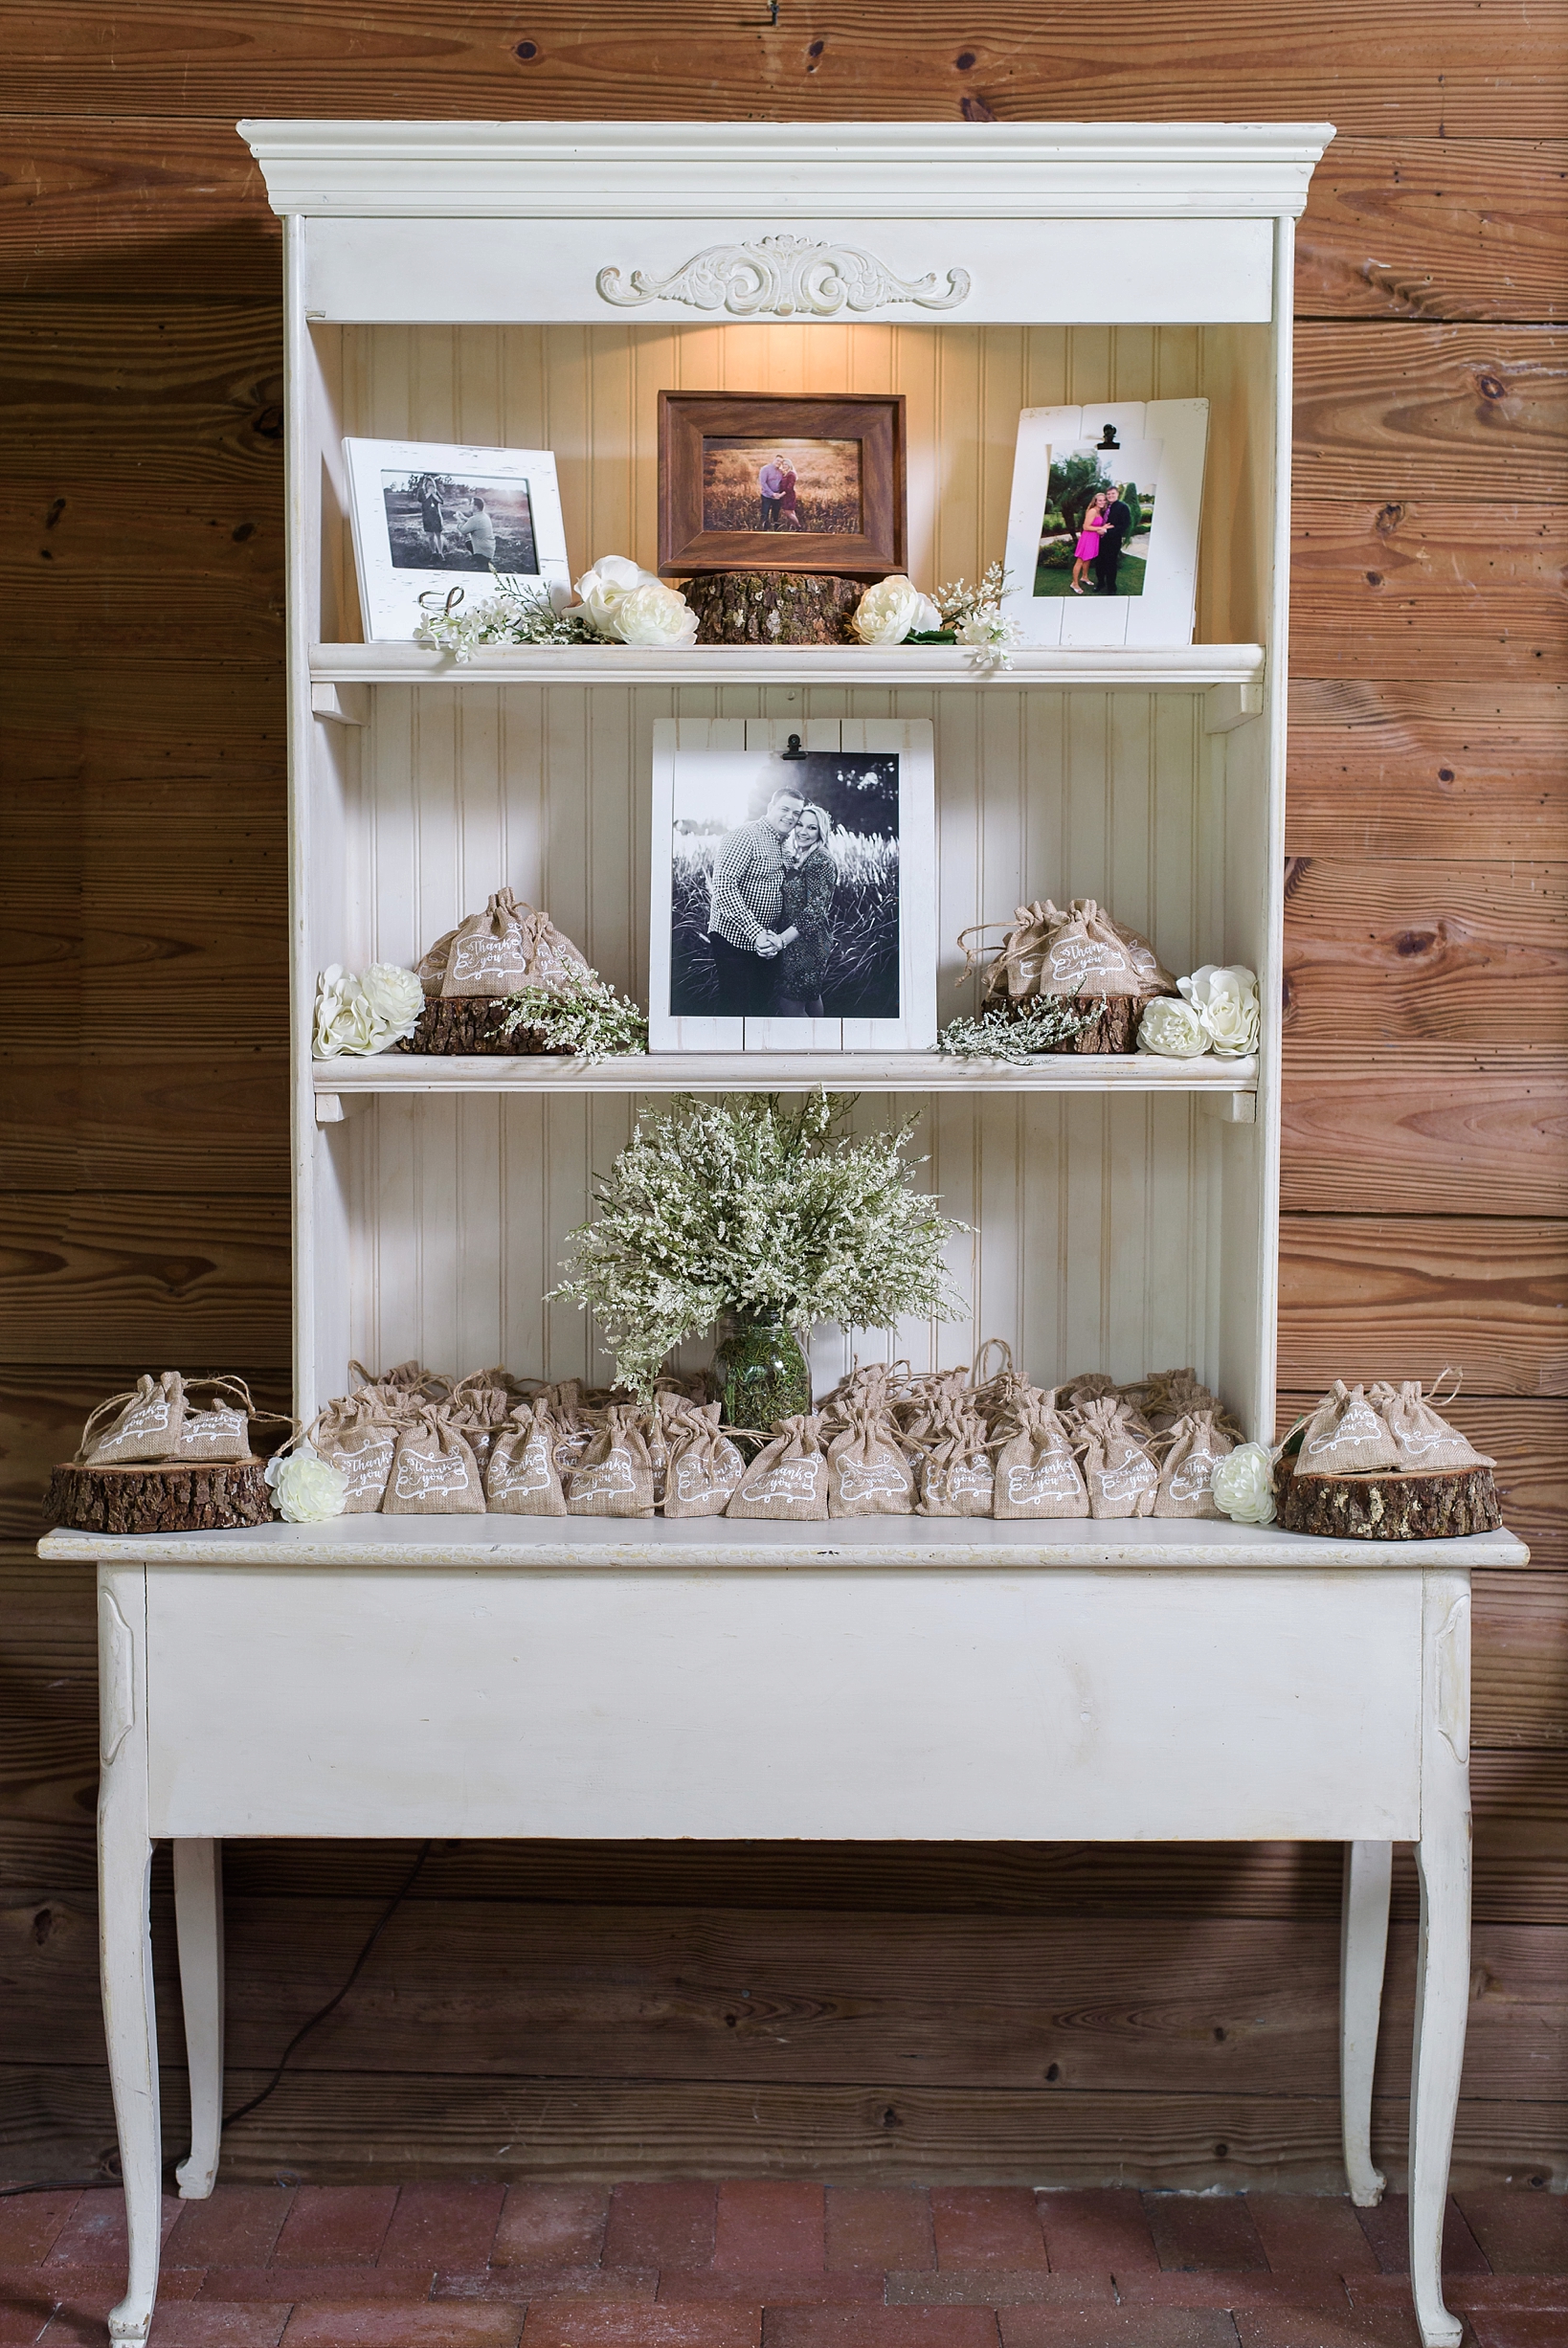 Thank you gifts and family photos on an antique vanity in the reception barn